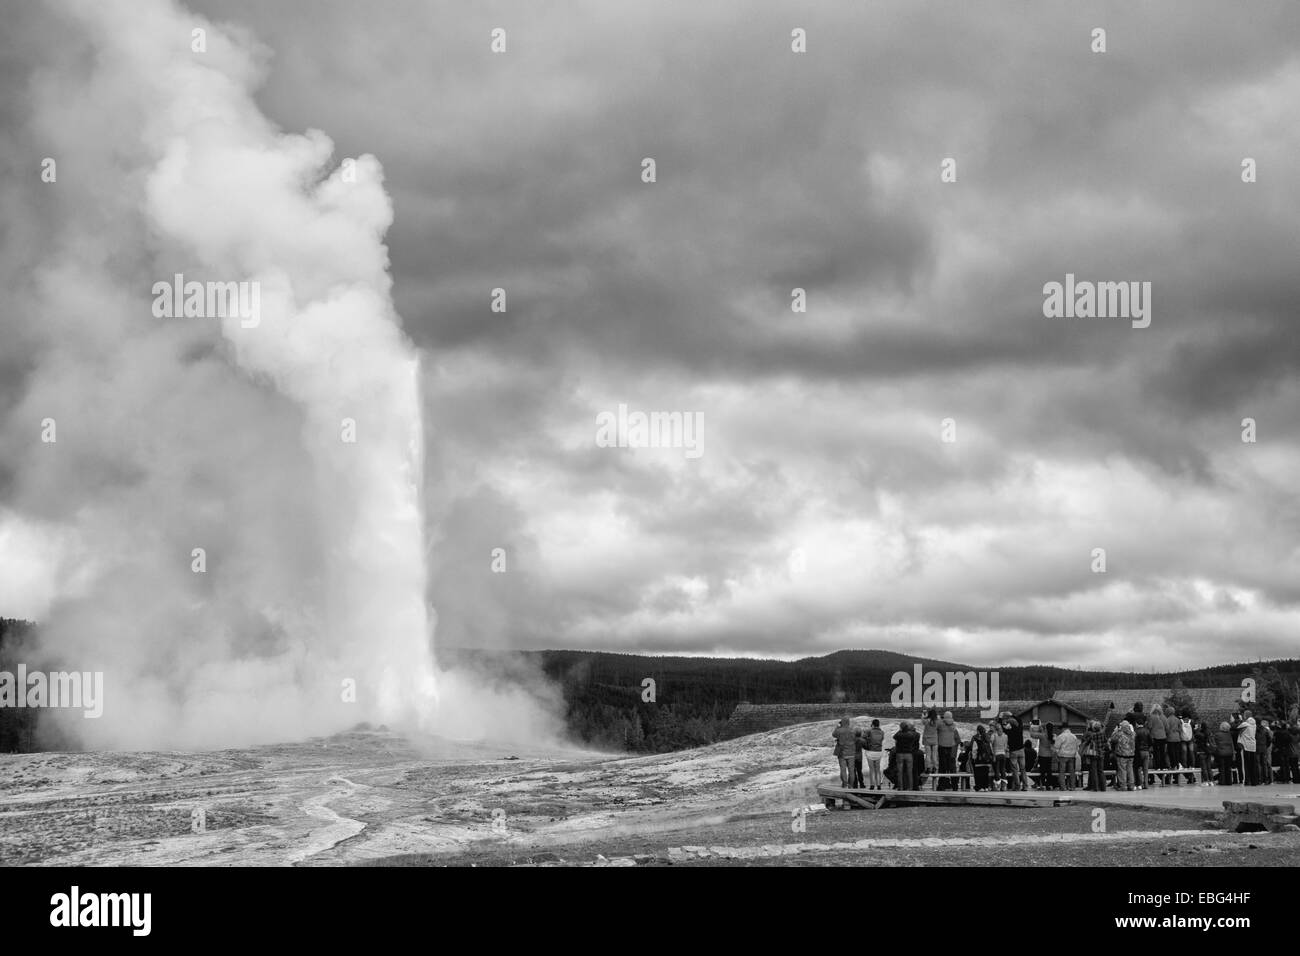 Old Faithful Geyser dans le Parc National de Yellowstone, Wyoming, USA Banque D'Images